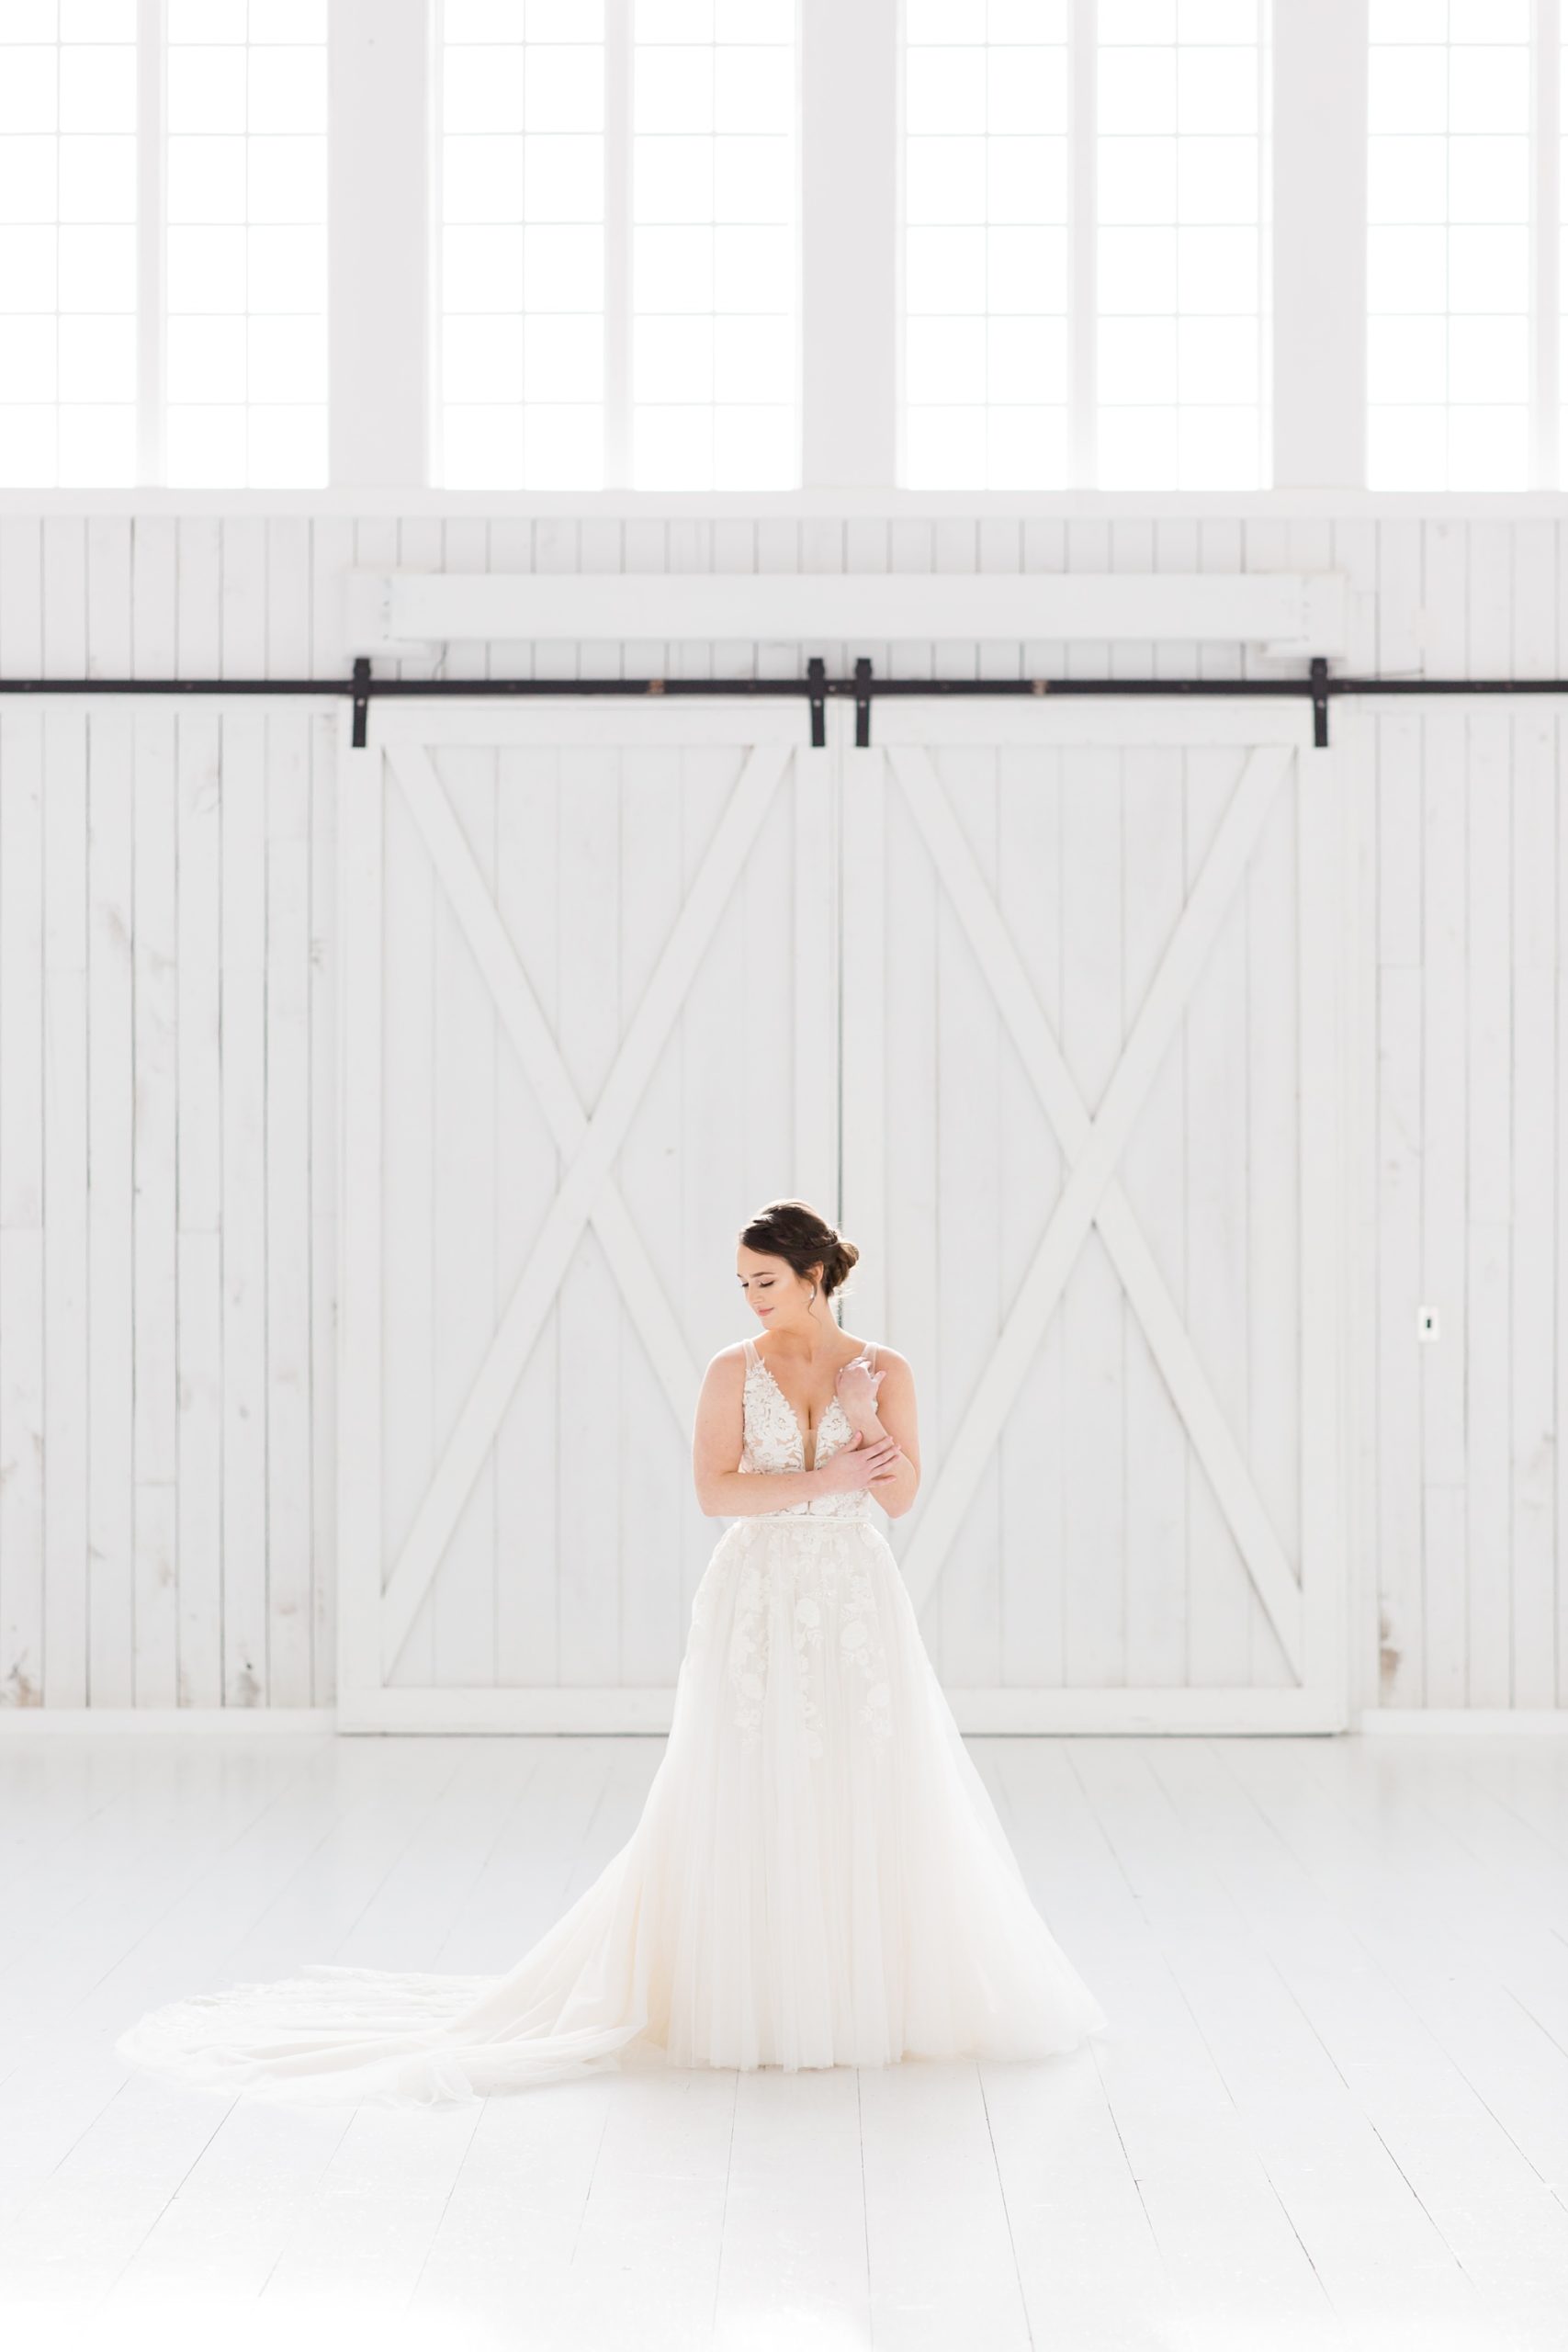 classic bridal portraits in front of barn door at the White Sparrow